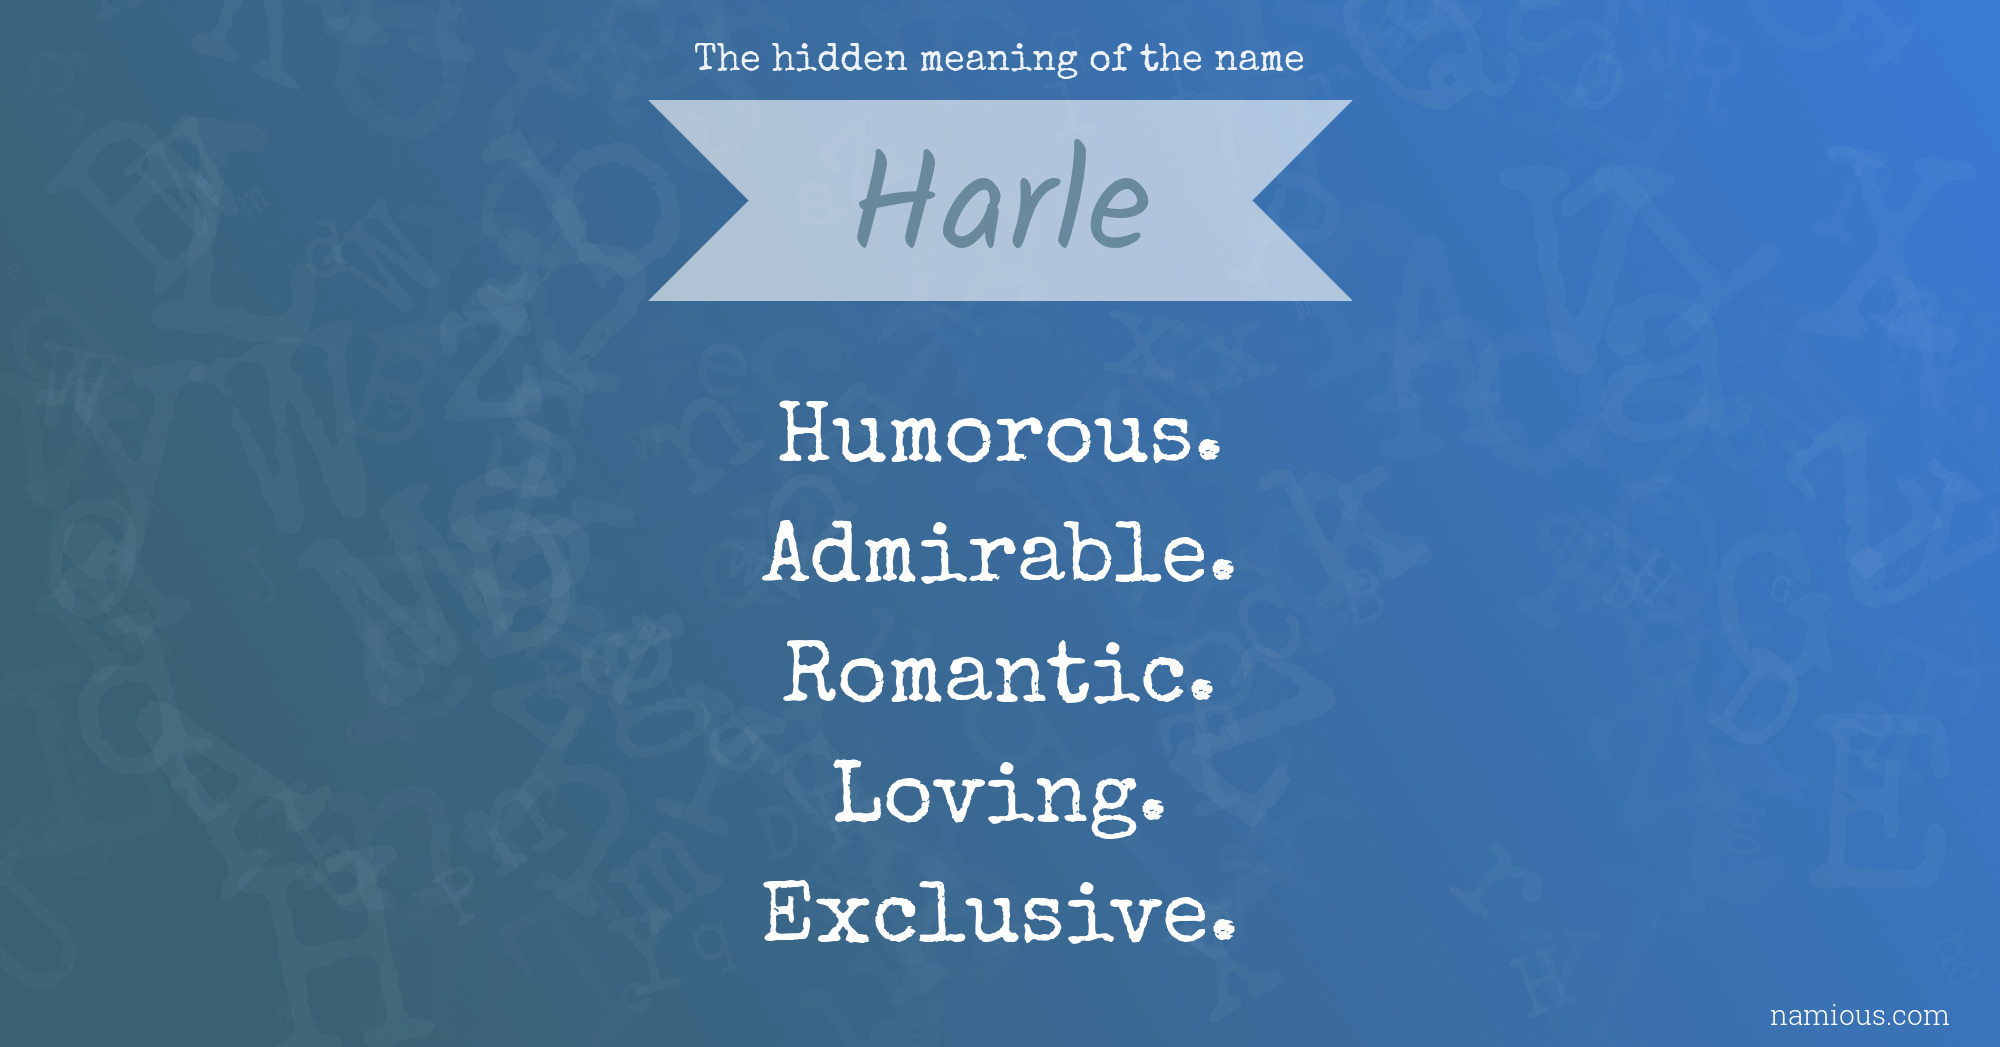 The hidden meaning of the name Harle